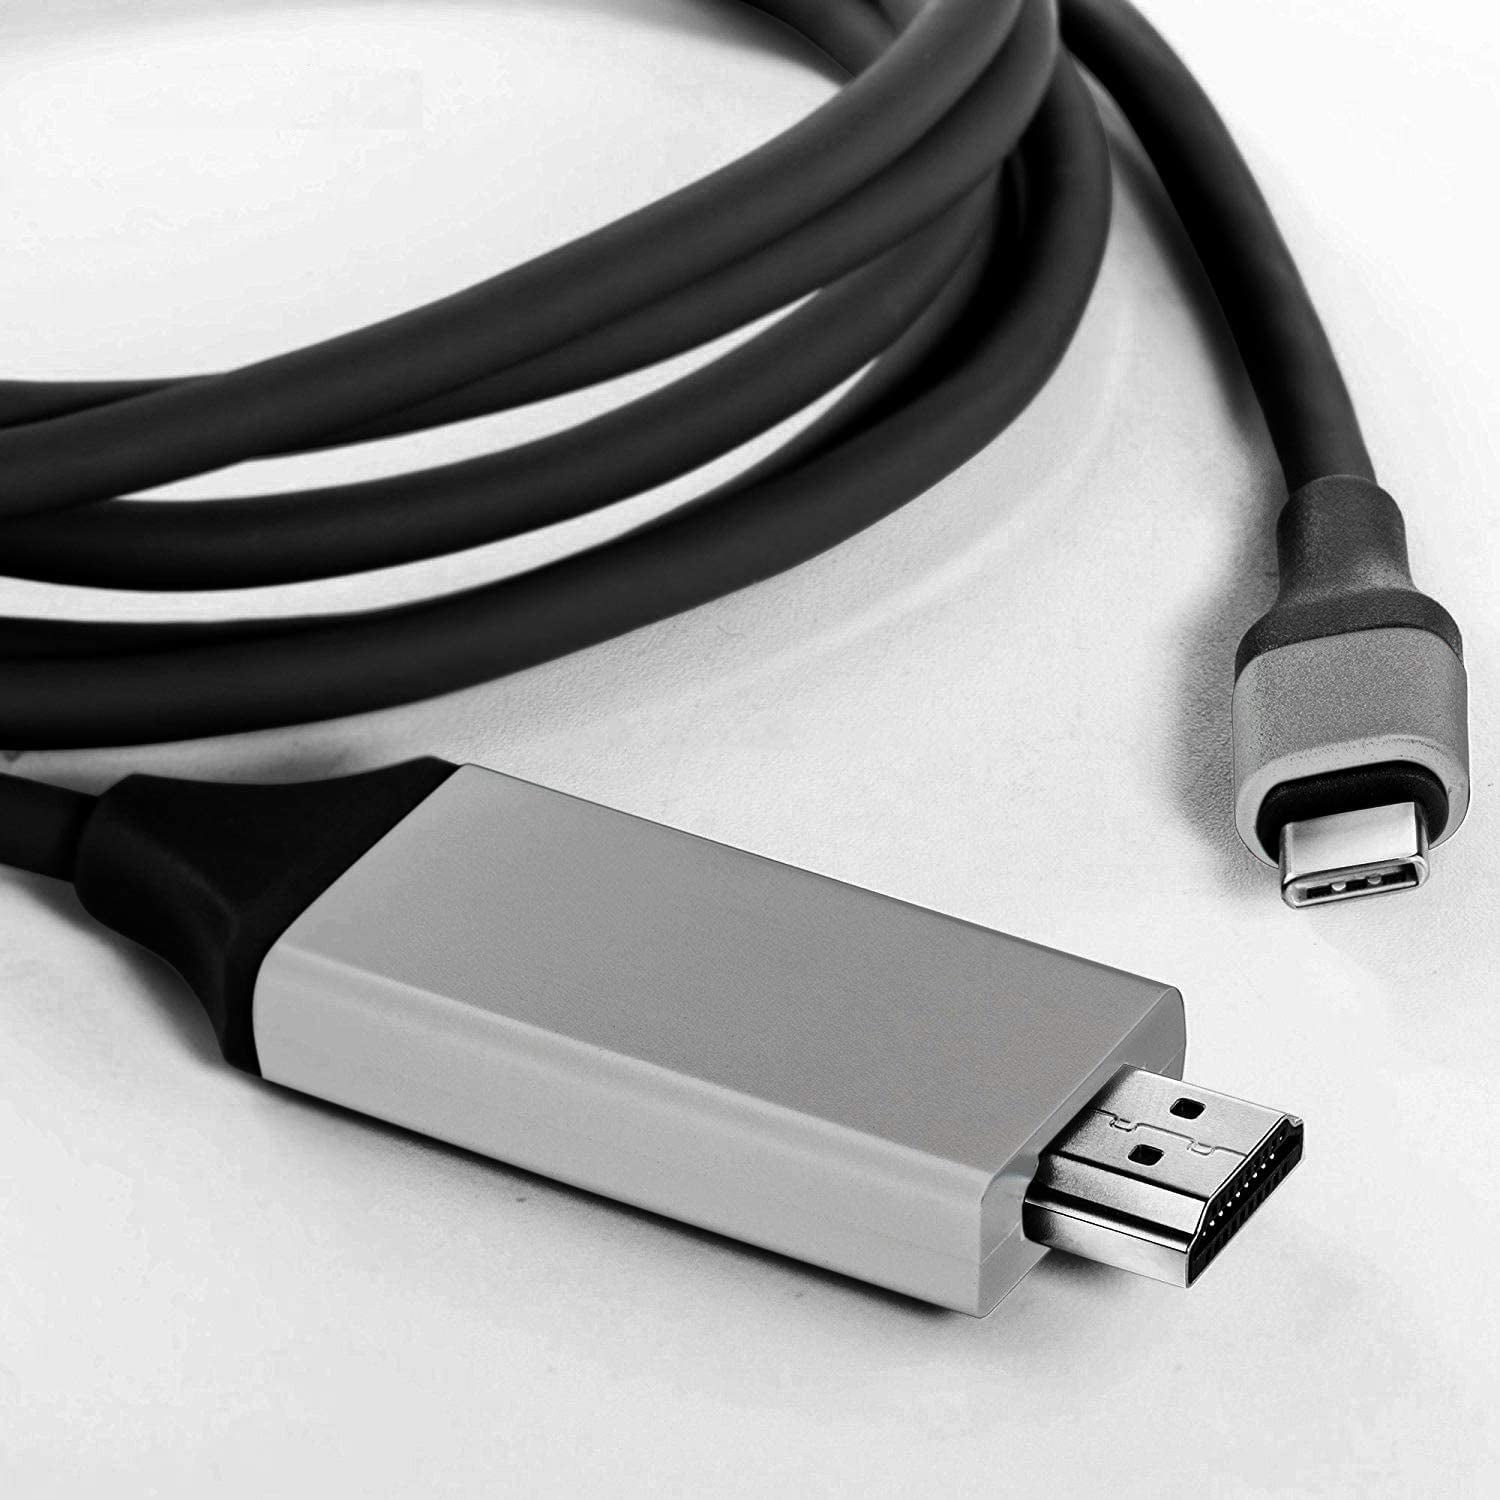 USB-C/PD 4k HDMI Cable Compatible with Apple MacBook Pro 2018/2017/2016/13"/16"/iMac Full 2160p@30Hz, 6Ft/2M [Gray, Thunderbolt 3 Compatible] -